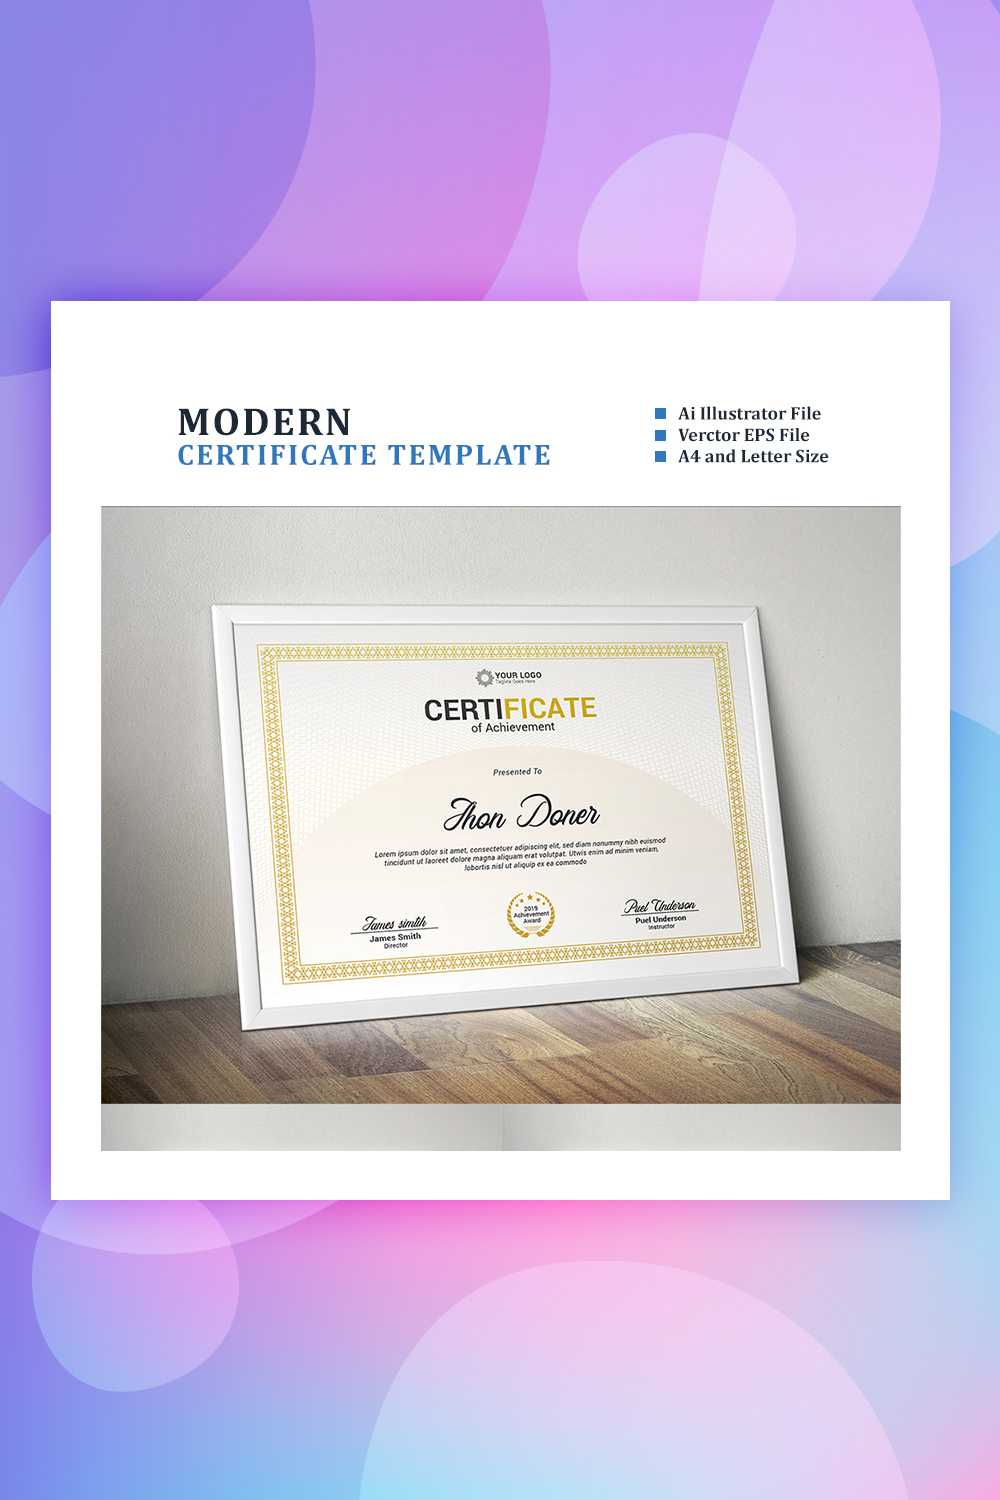 28 Attention Grabbing Certificate Templates – Colorlib In No Certificate Templates Could Be Found